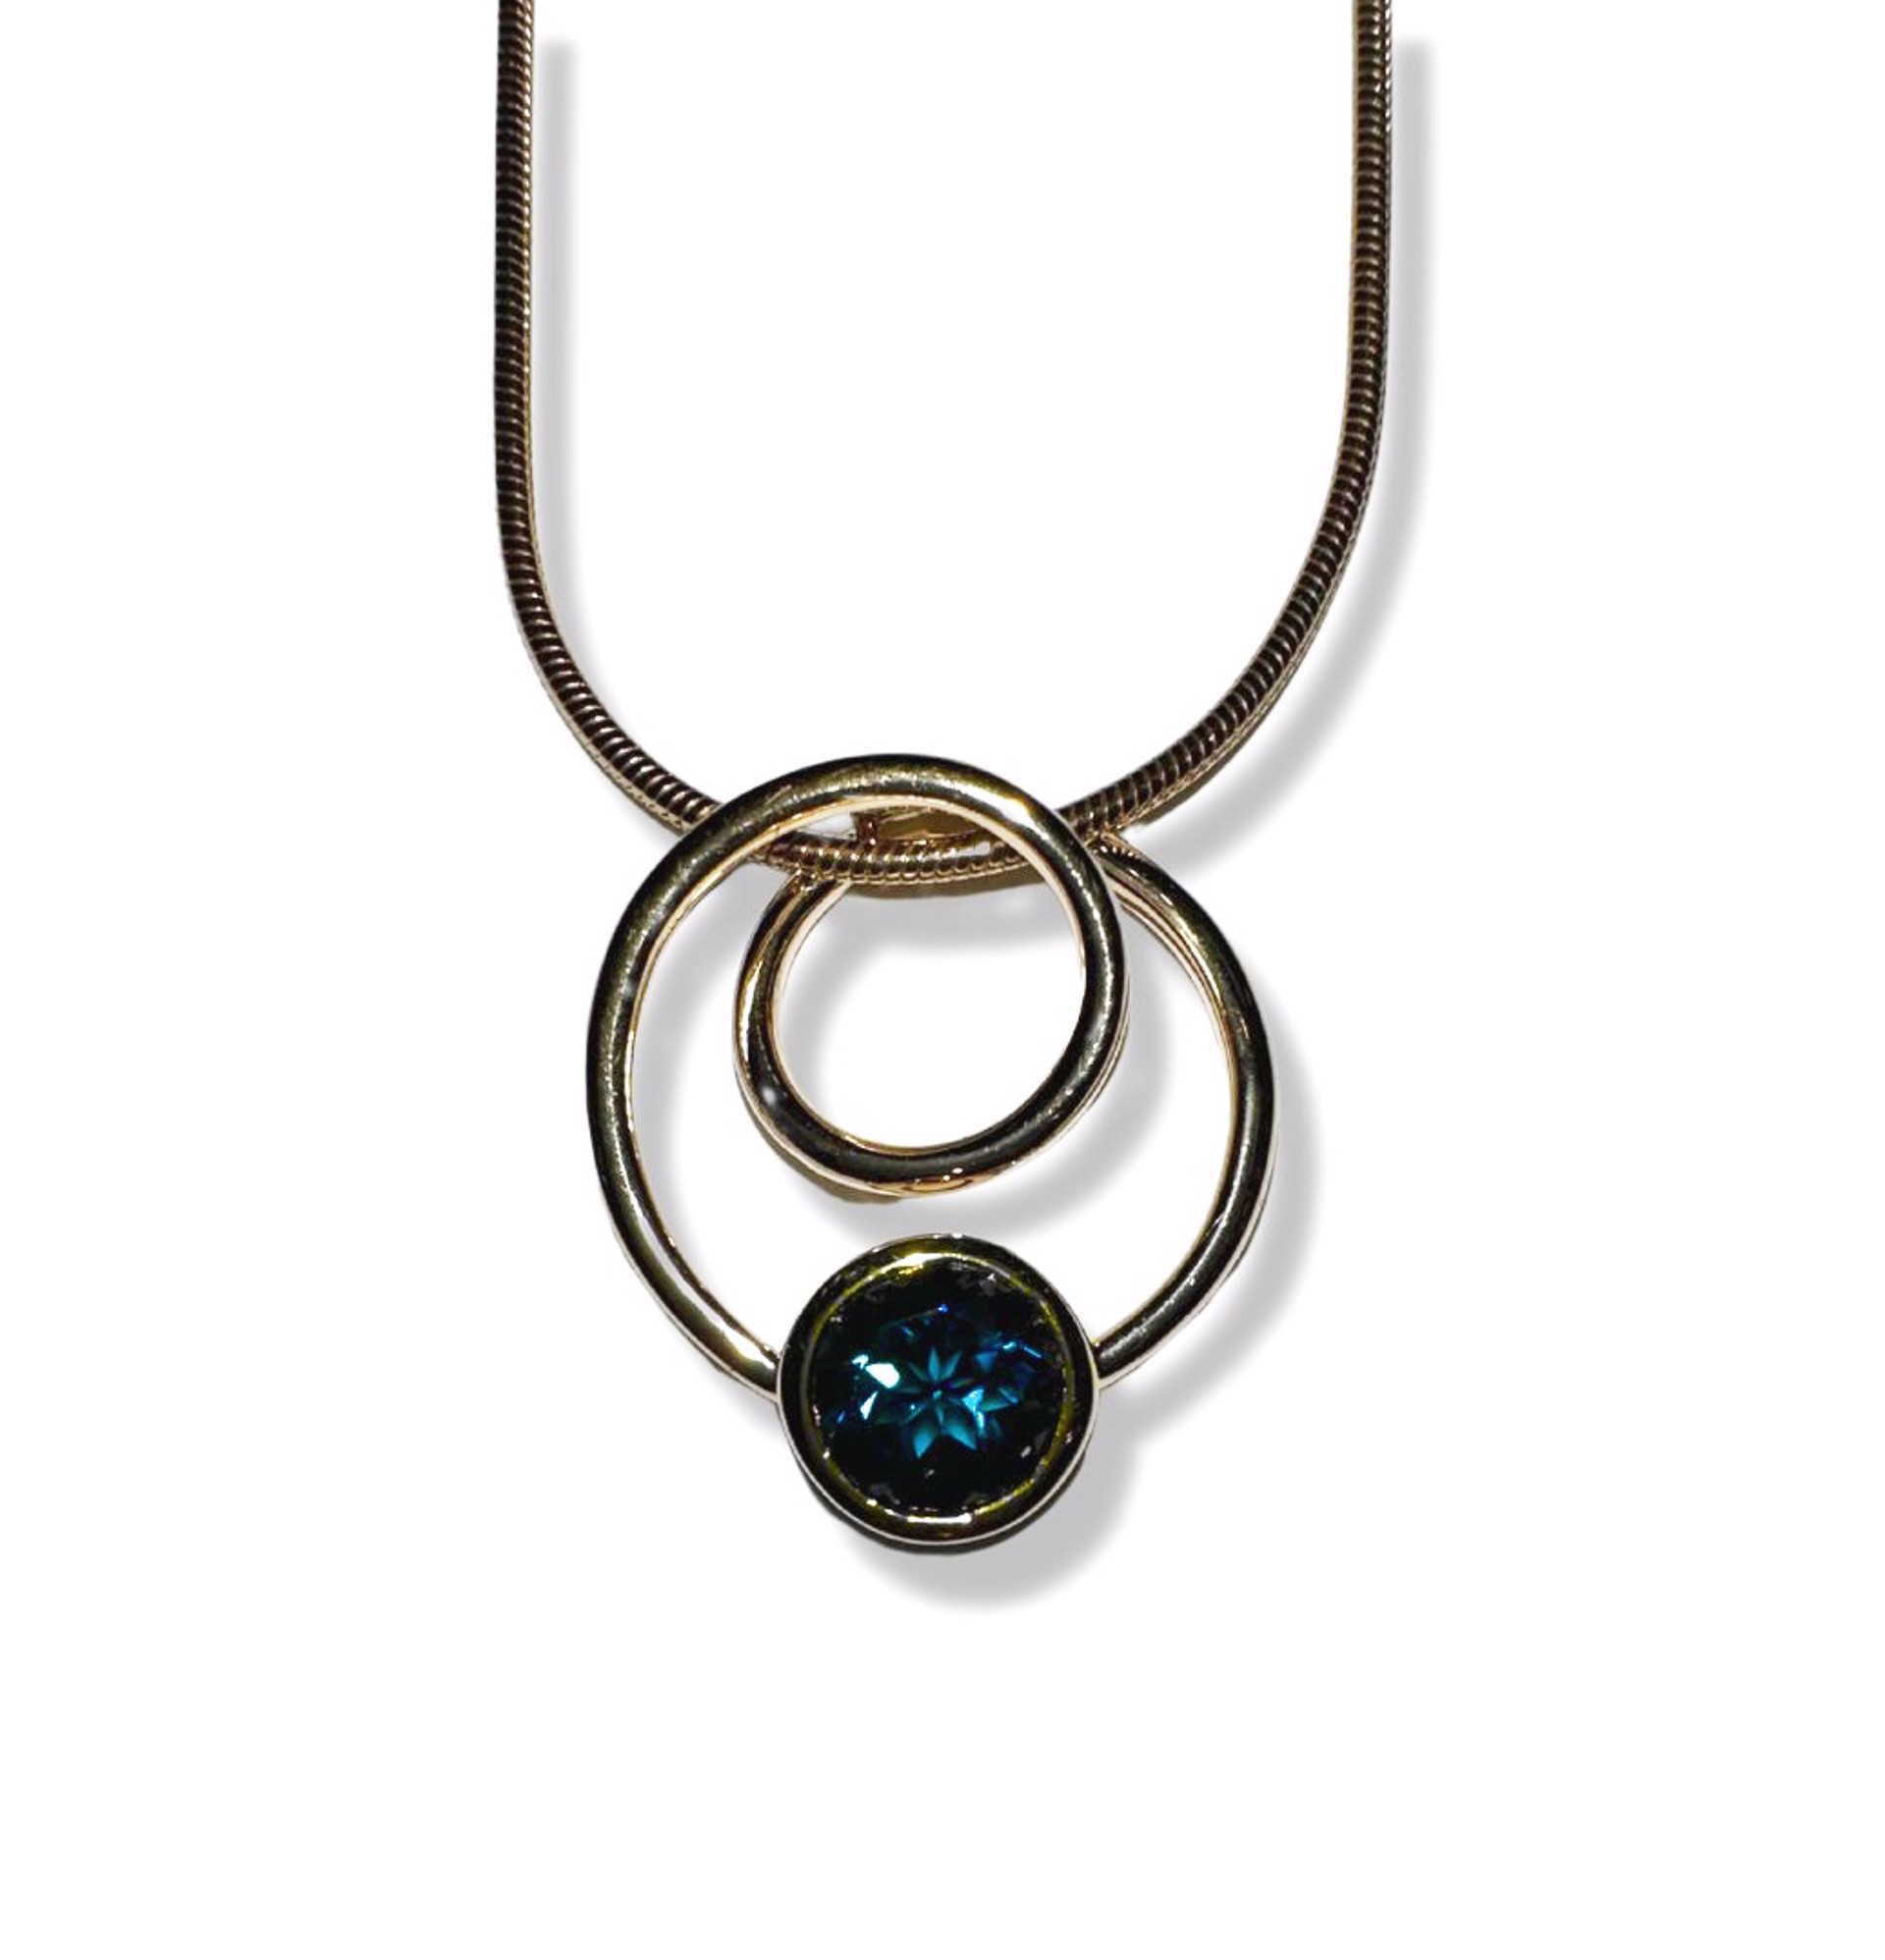 Pendant - Circle Swirl with London Blue Topaz and 14kt Goldfilled P7774 by Joryel Vera